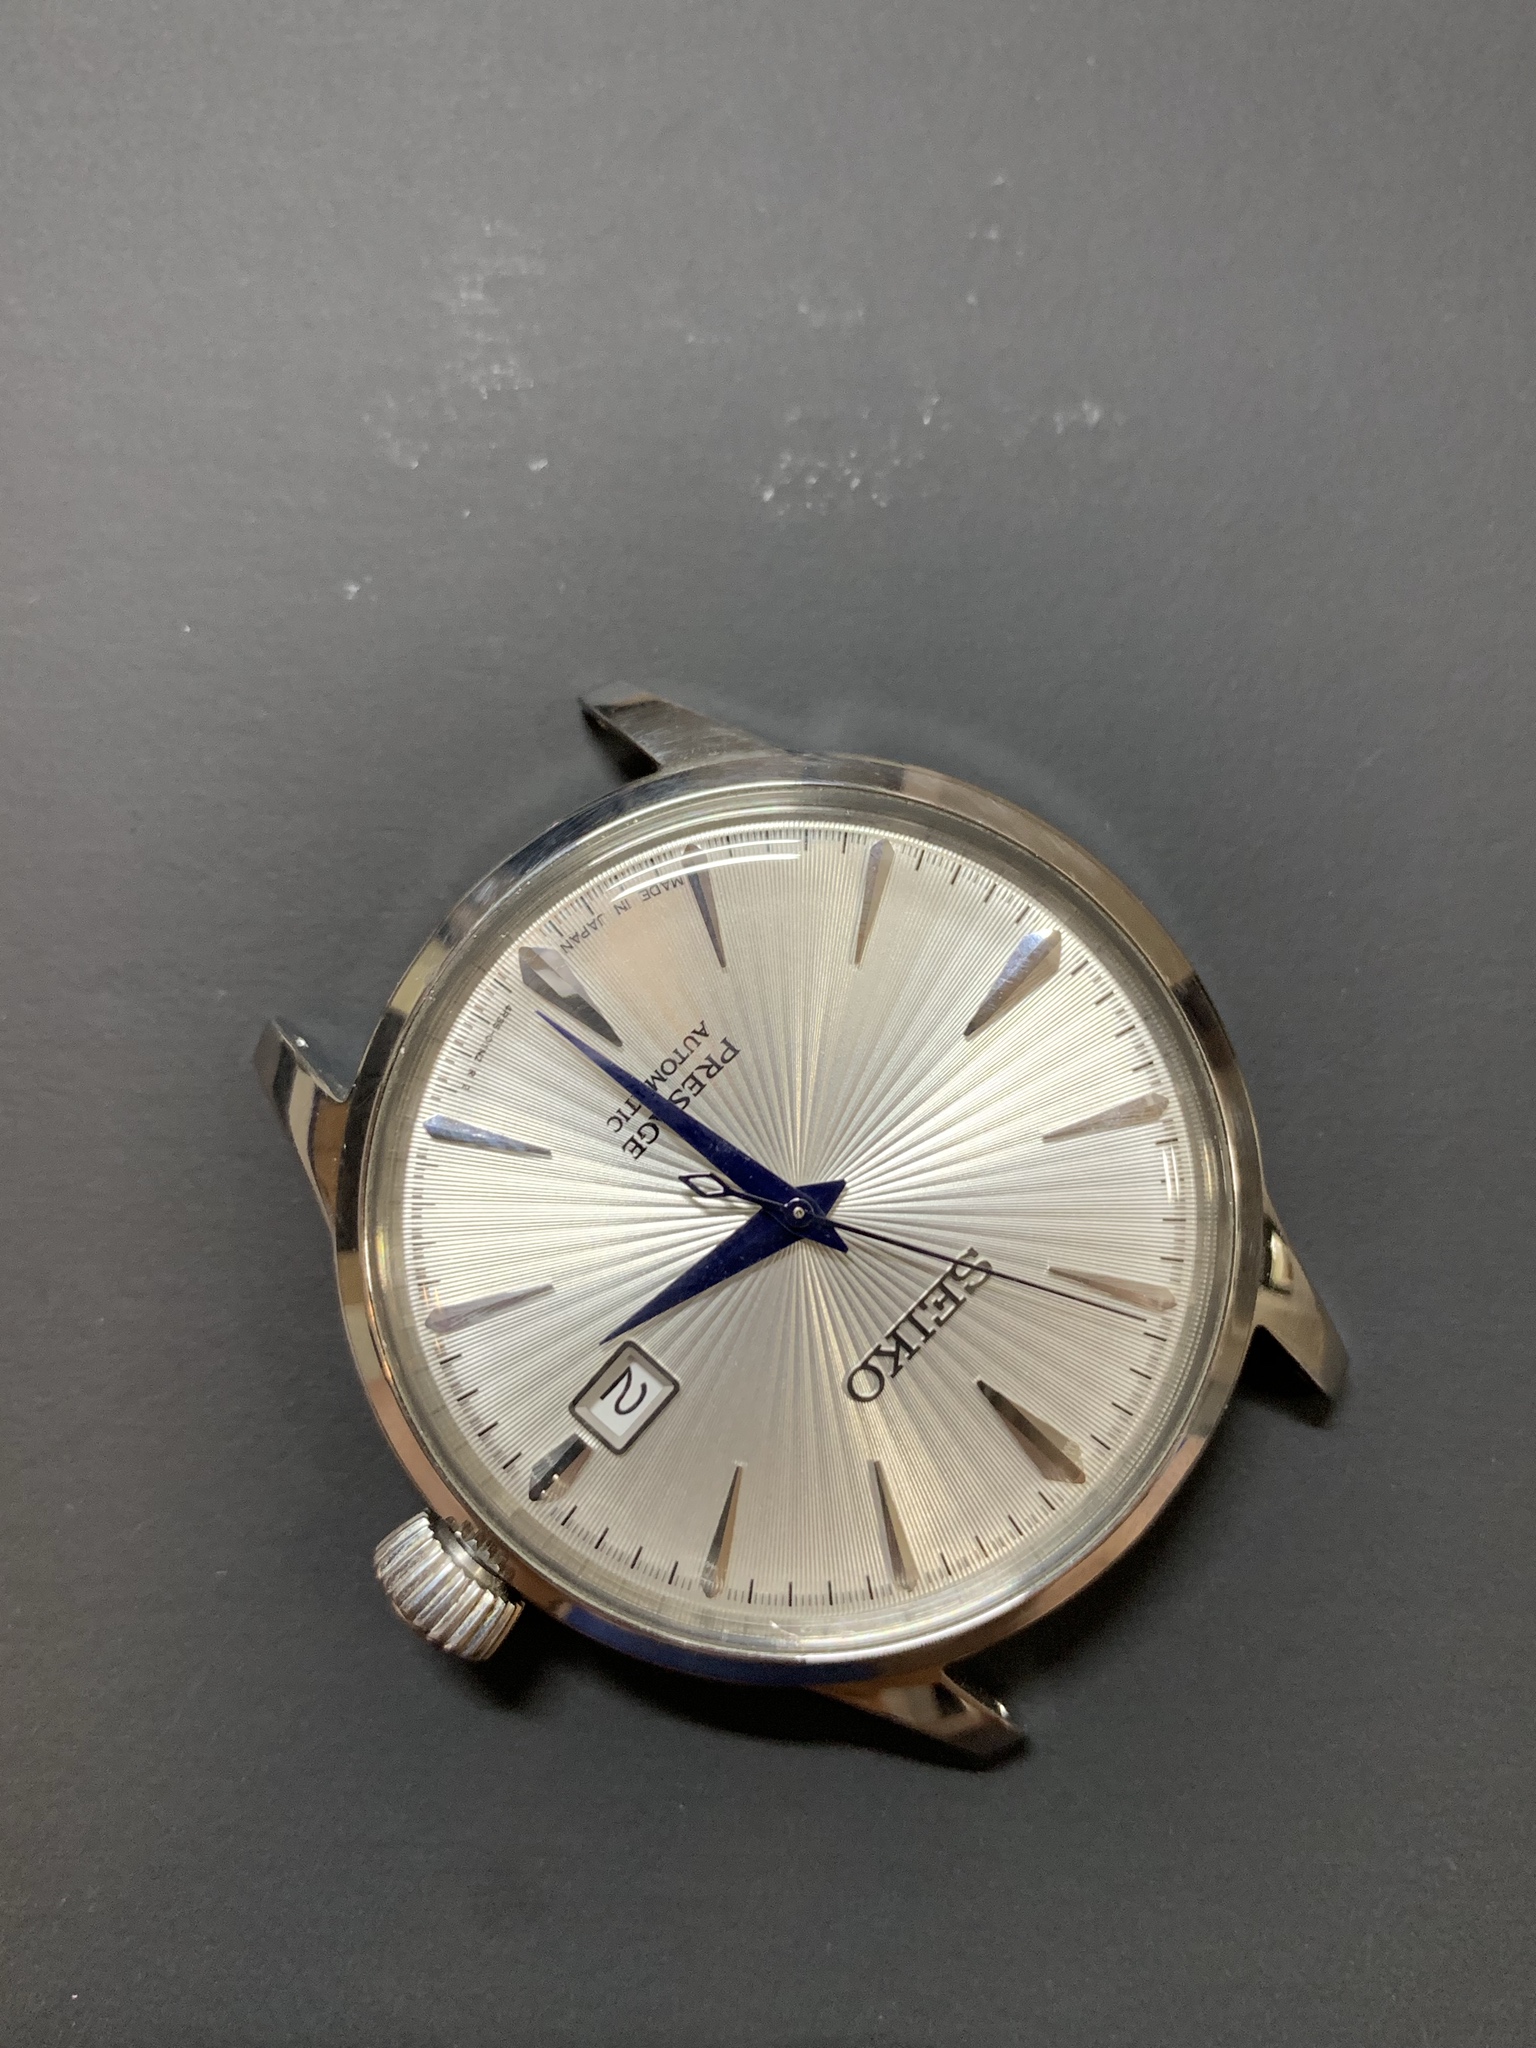 [WTS] Seiko Presage Cocktail Time SRPB77 on StrapCode Jubilee ...